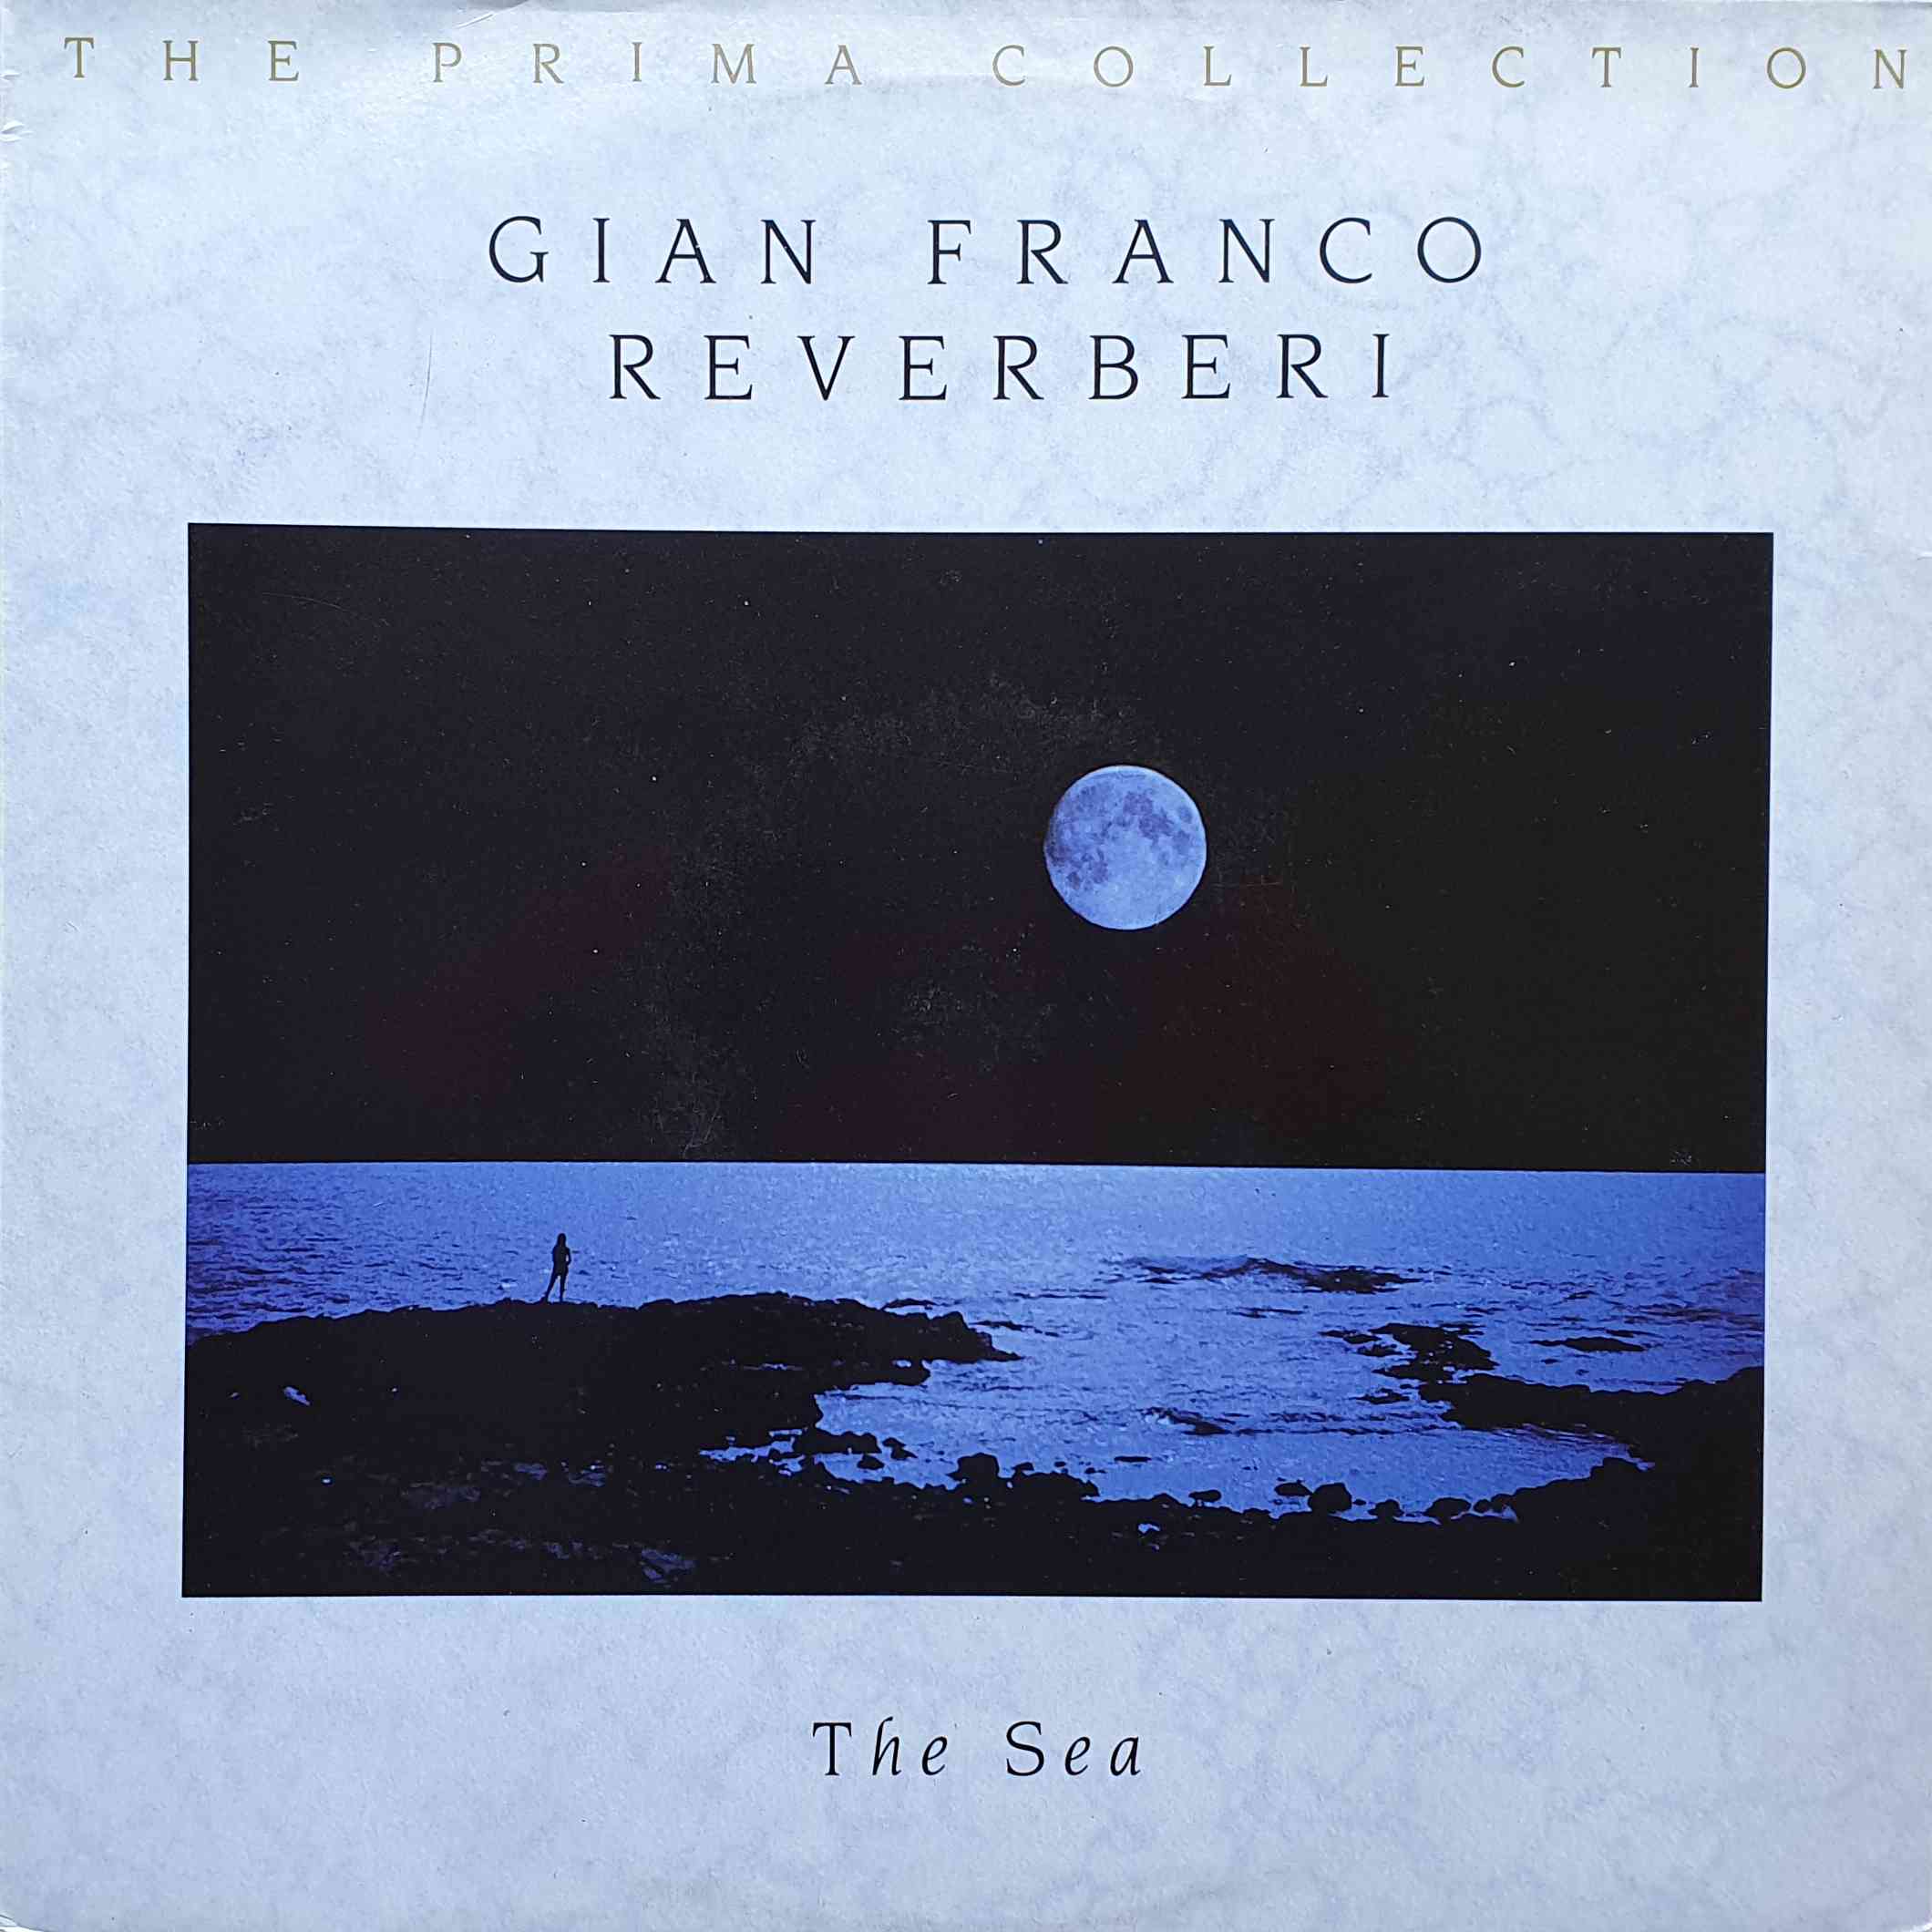 Picture of PRIM 6001 The sea by artist Gian Franco Reverberi from the BBC albums - Records and Tapes library